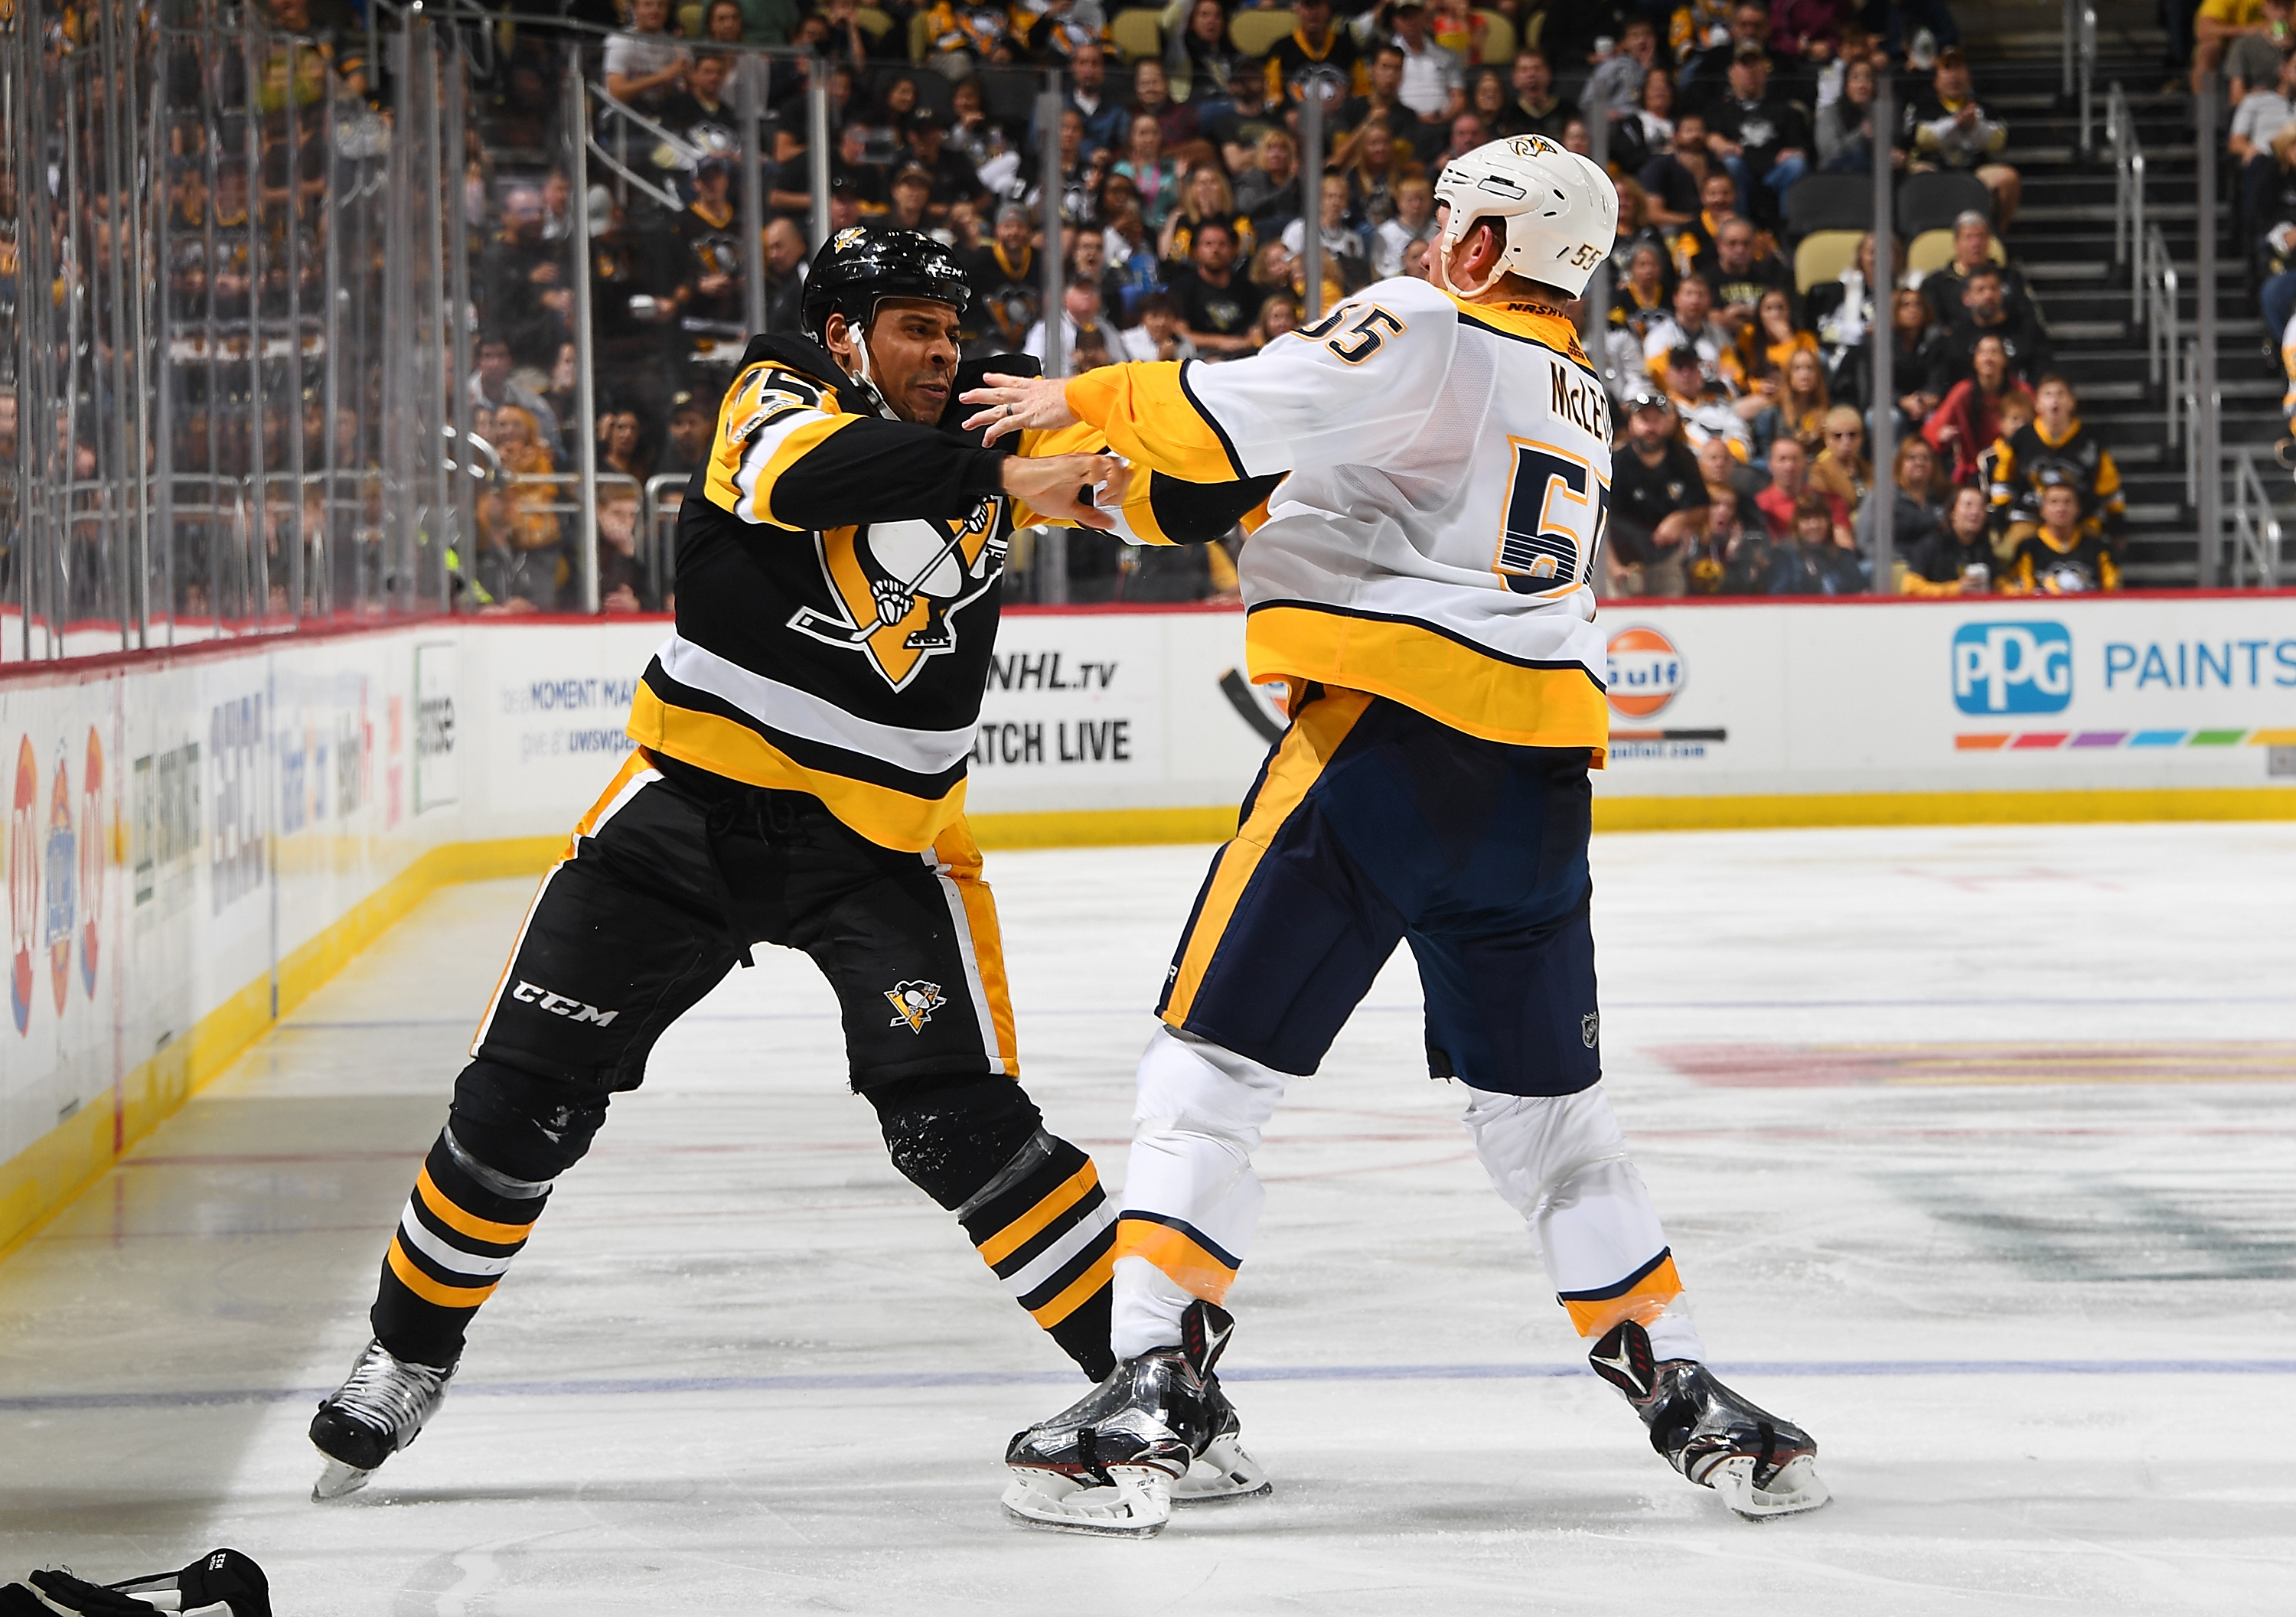 Poking holes in the 'Ryan Reaves could have lifted the Penguins